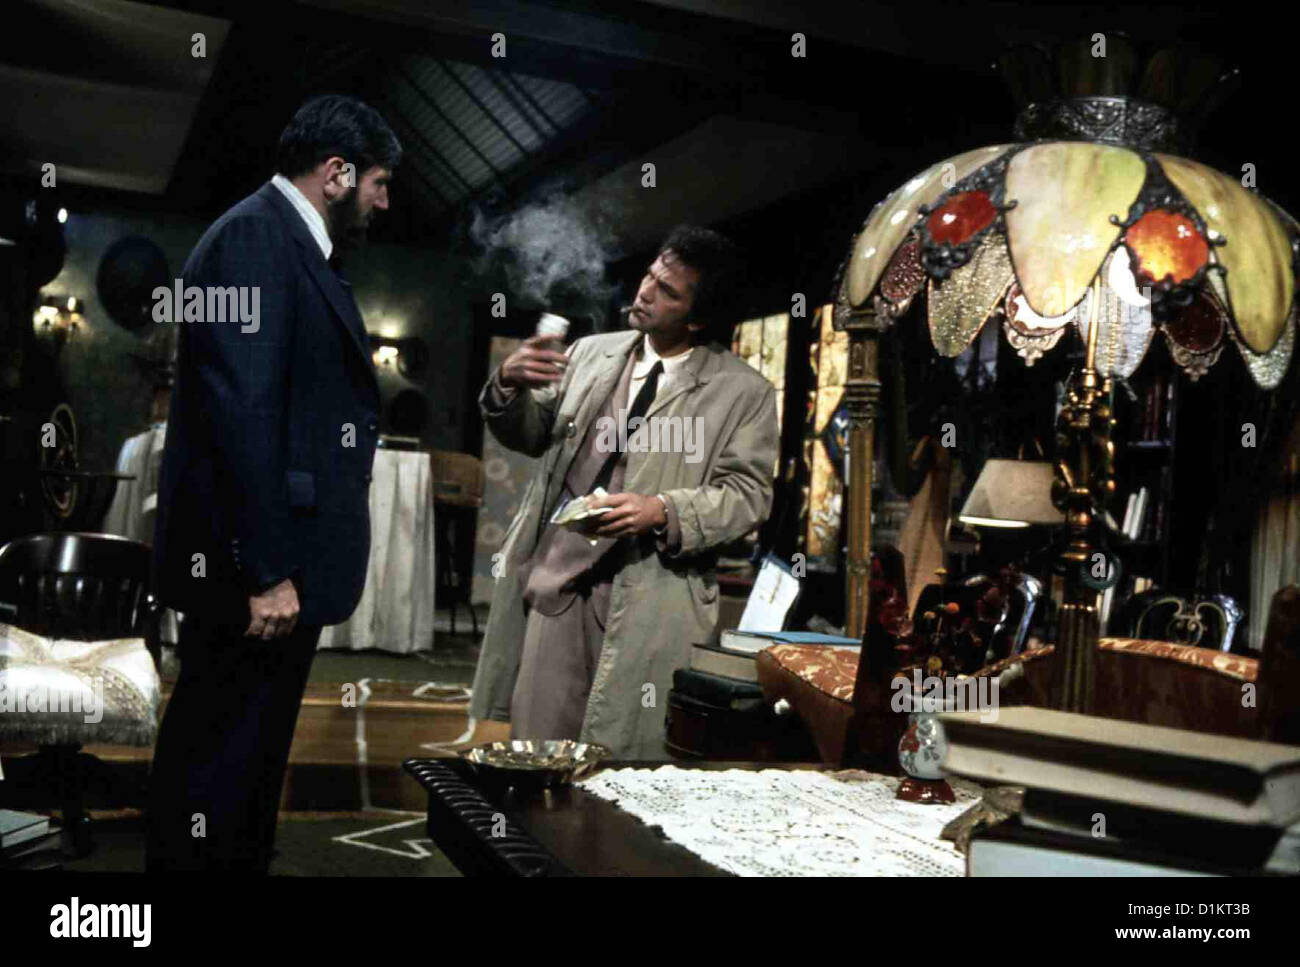 Todessymphonie bye-bye : Columbo Meurtre Theodore Bikel Iq Illimitée, Peter Falk Steuerberater Oliver Brandt (Theodore Bikel) Banque D'Images